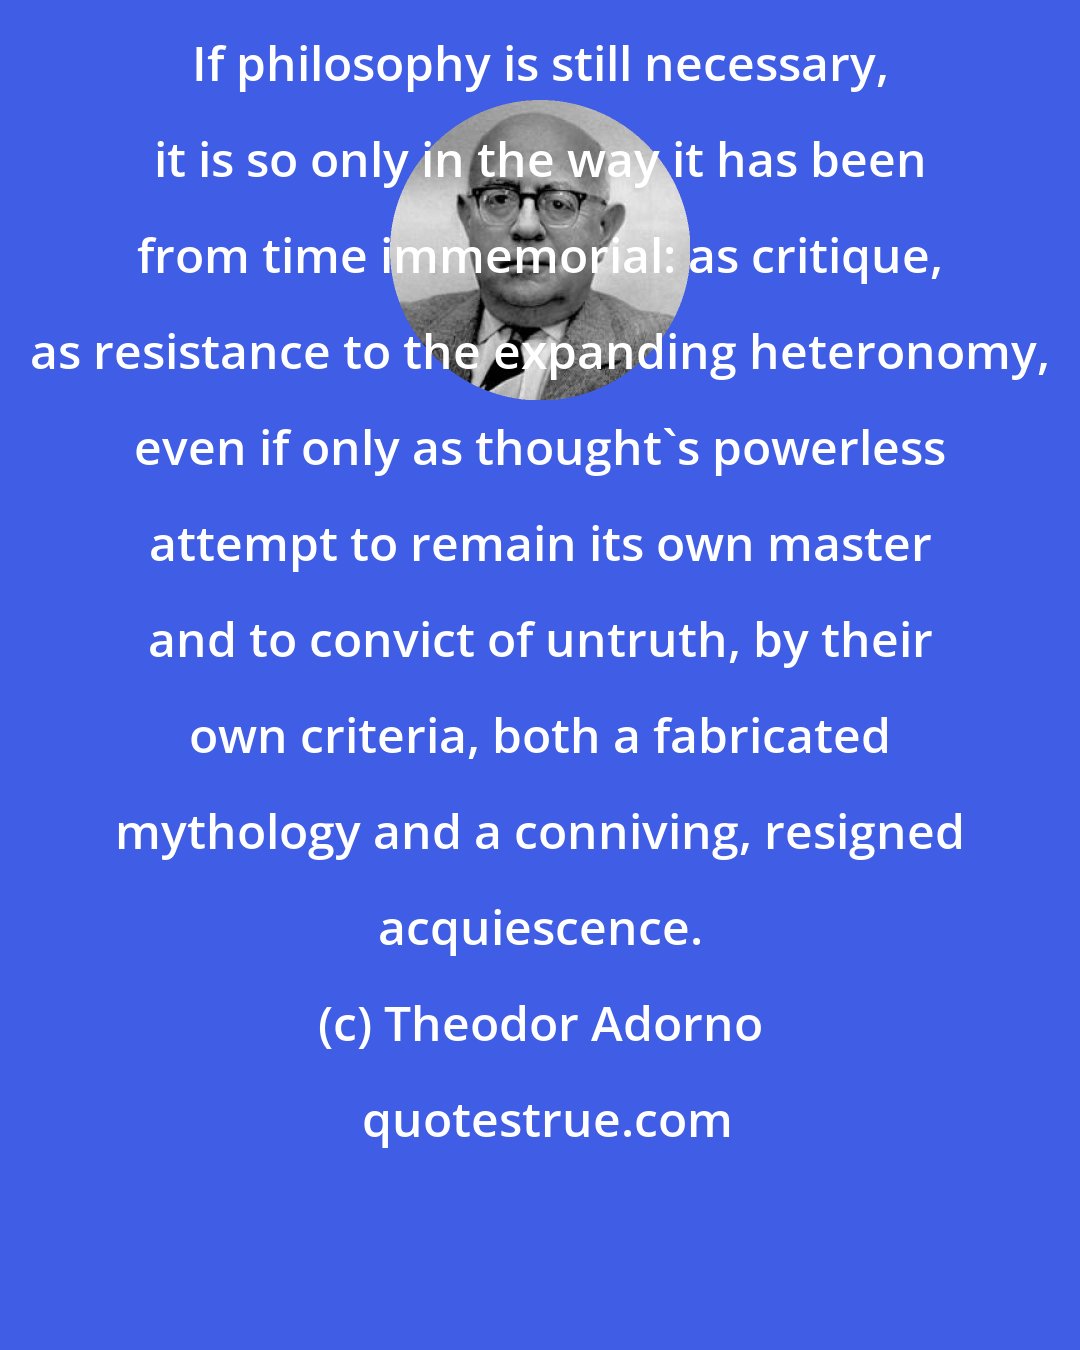 Theodor Adorno: If philosophy is still necessary, it is so only in the way it has been from time immemorial: as critique, as resistance to the expanding heteronomy, even if only as thought's powerless attempt to remain its own master and to convict of untruth, by their own criteria, both a fabricated mythology and a conniving, resigned acquiescence.